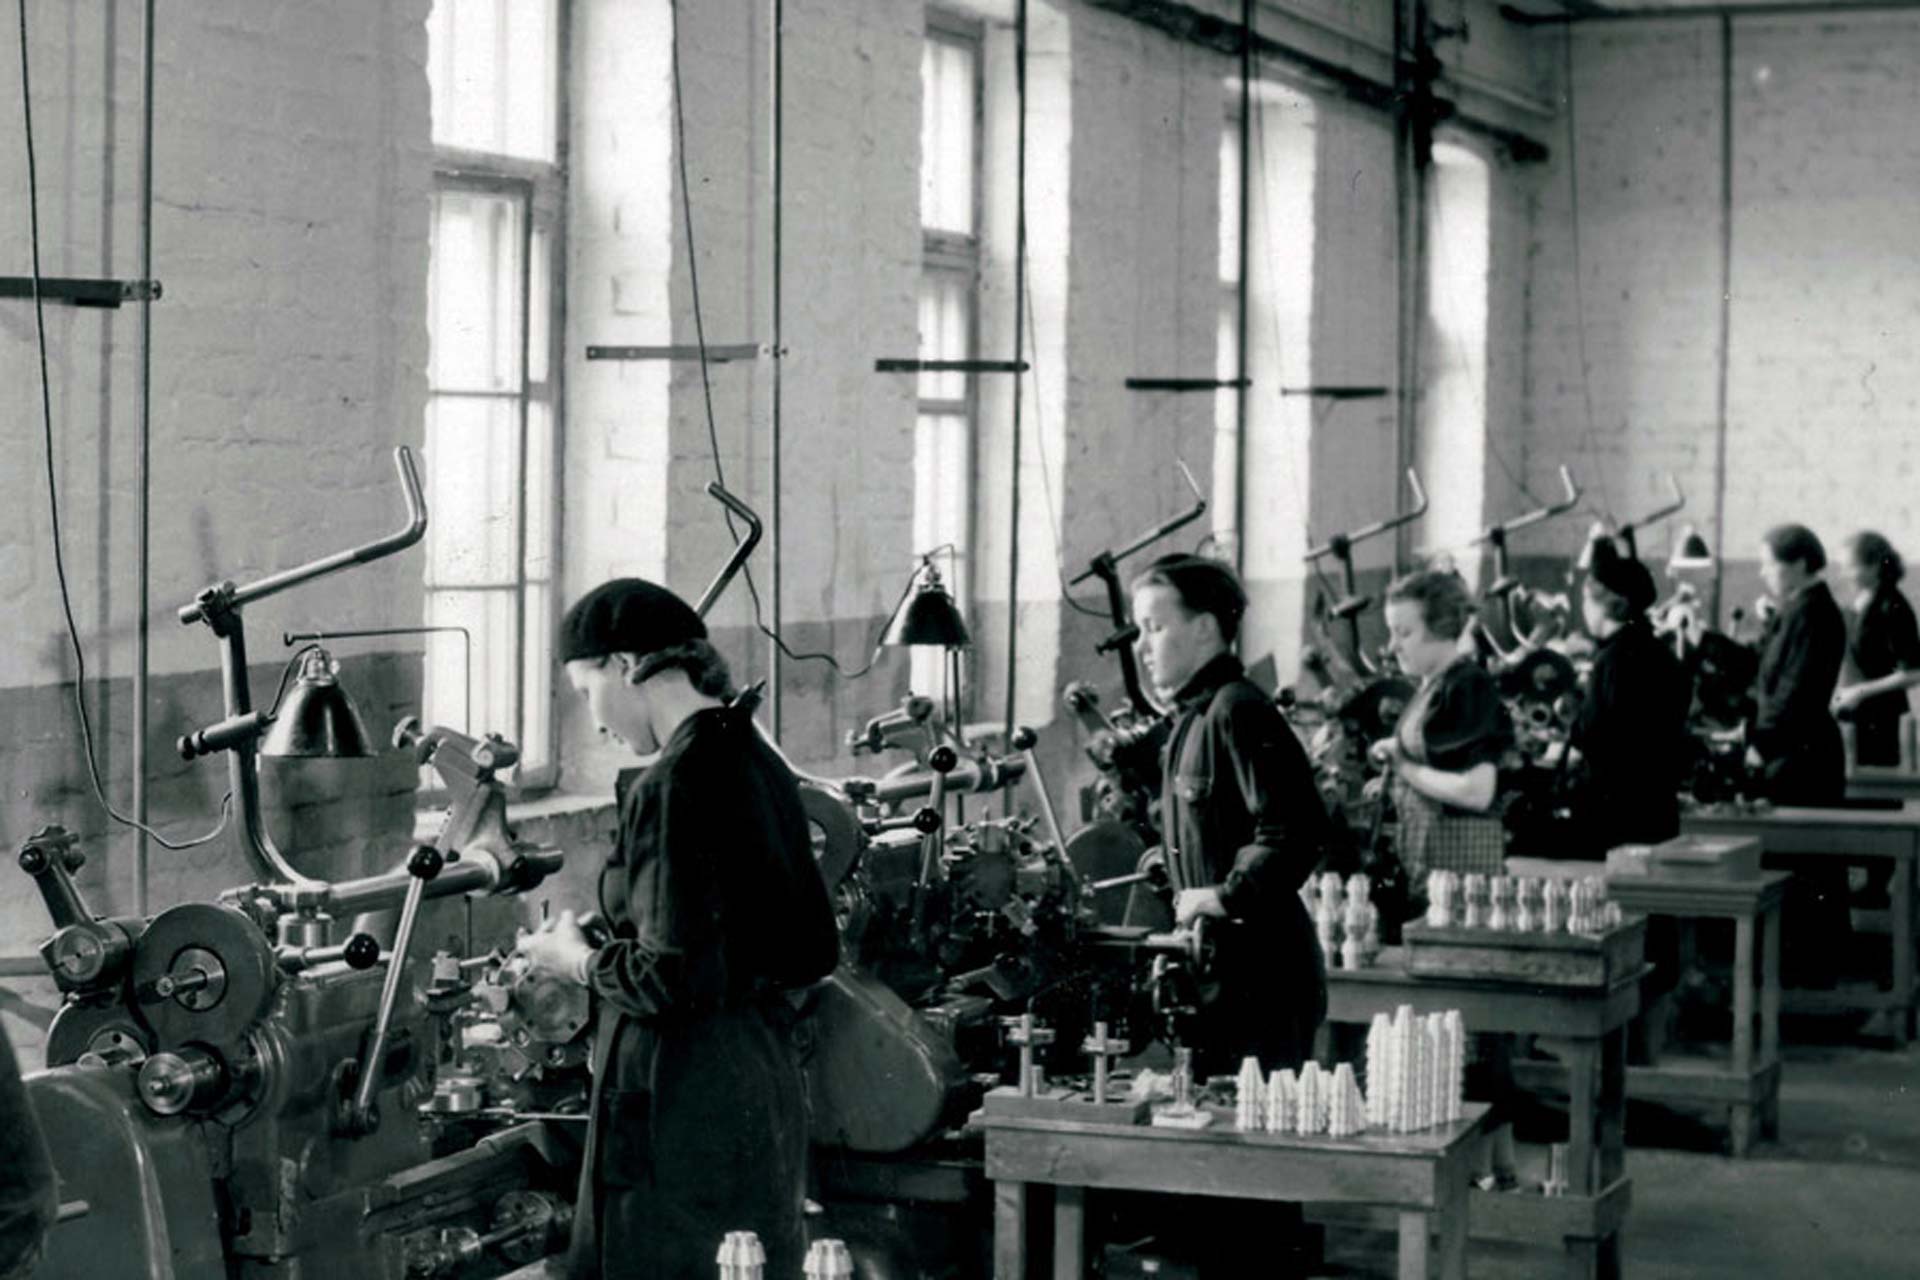 Detonators being manufactured at the Rauma factory during the war.